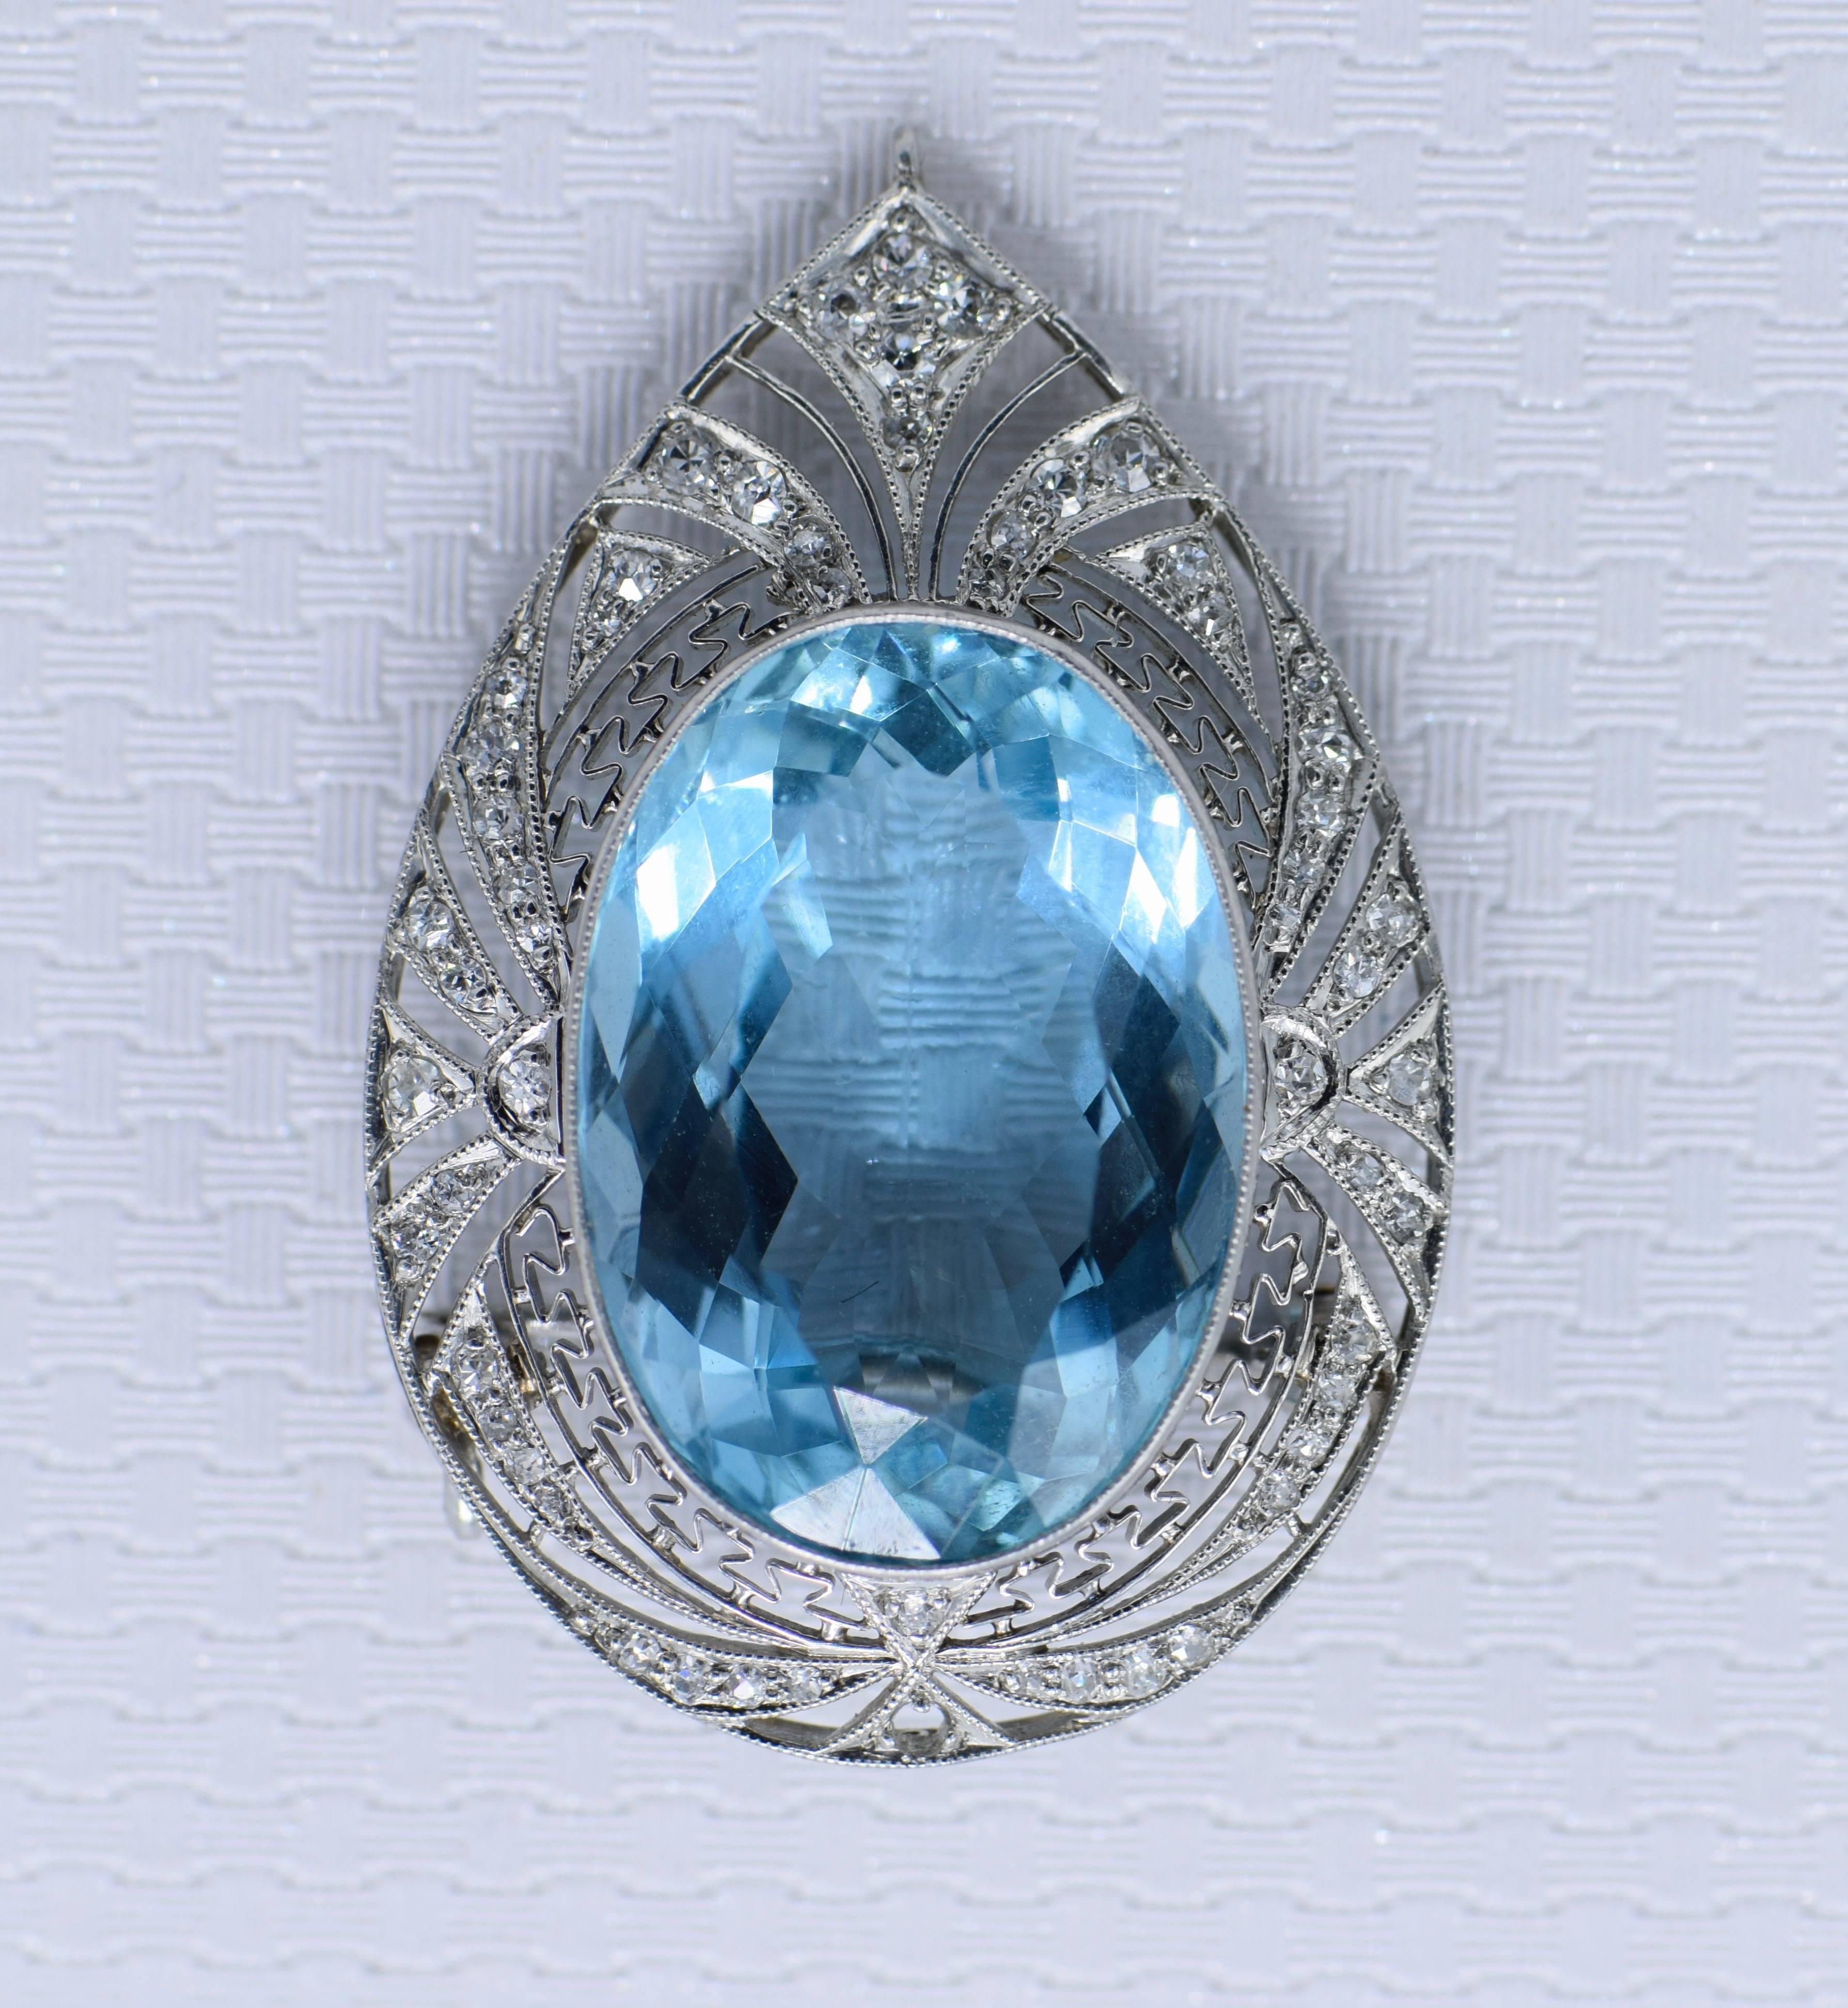 One oval aquamarine ap. 15.25 cts., small old-mine & single-cut diamonds, c. 1915, ap. 6 dwts. 

Aquamarine: medium sky blue around table, lighter faintly greenish-blue in center, cleanish, minor abrasions on culet junction, nice shape and cut, very